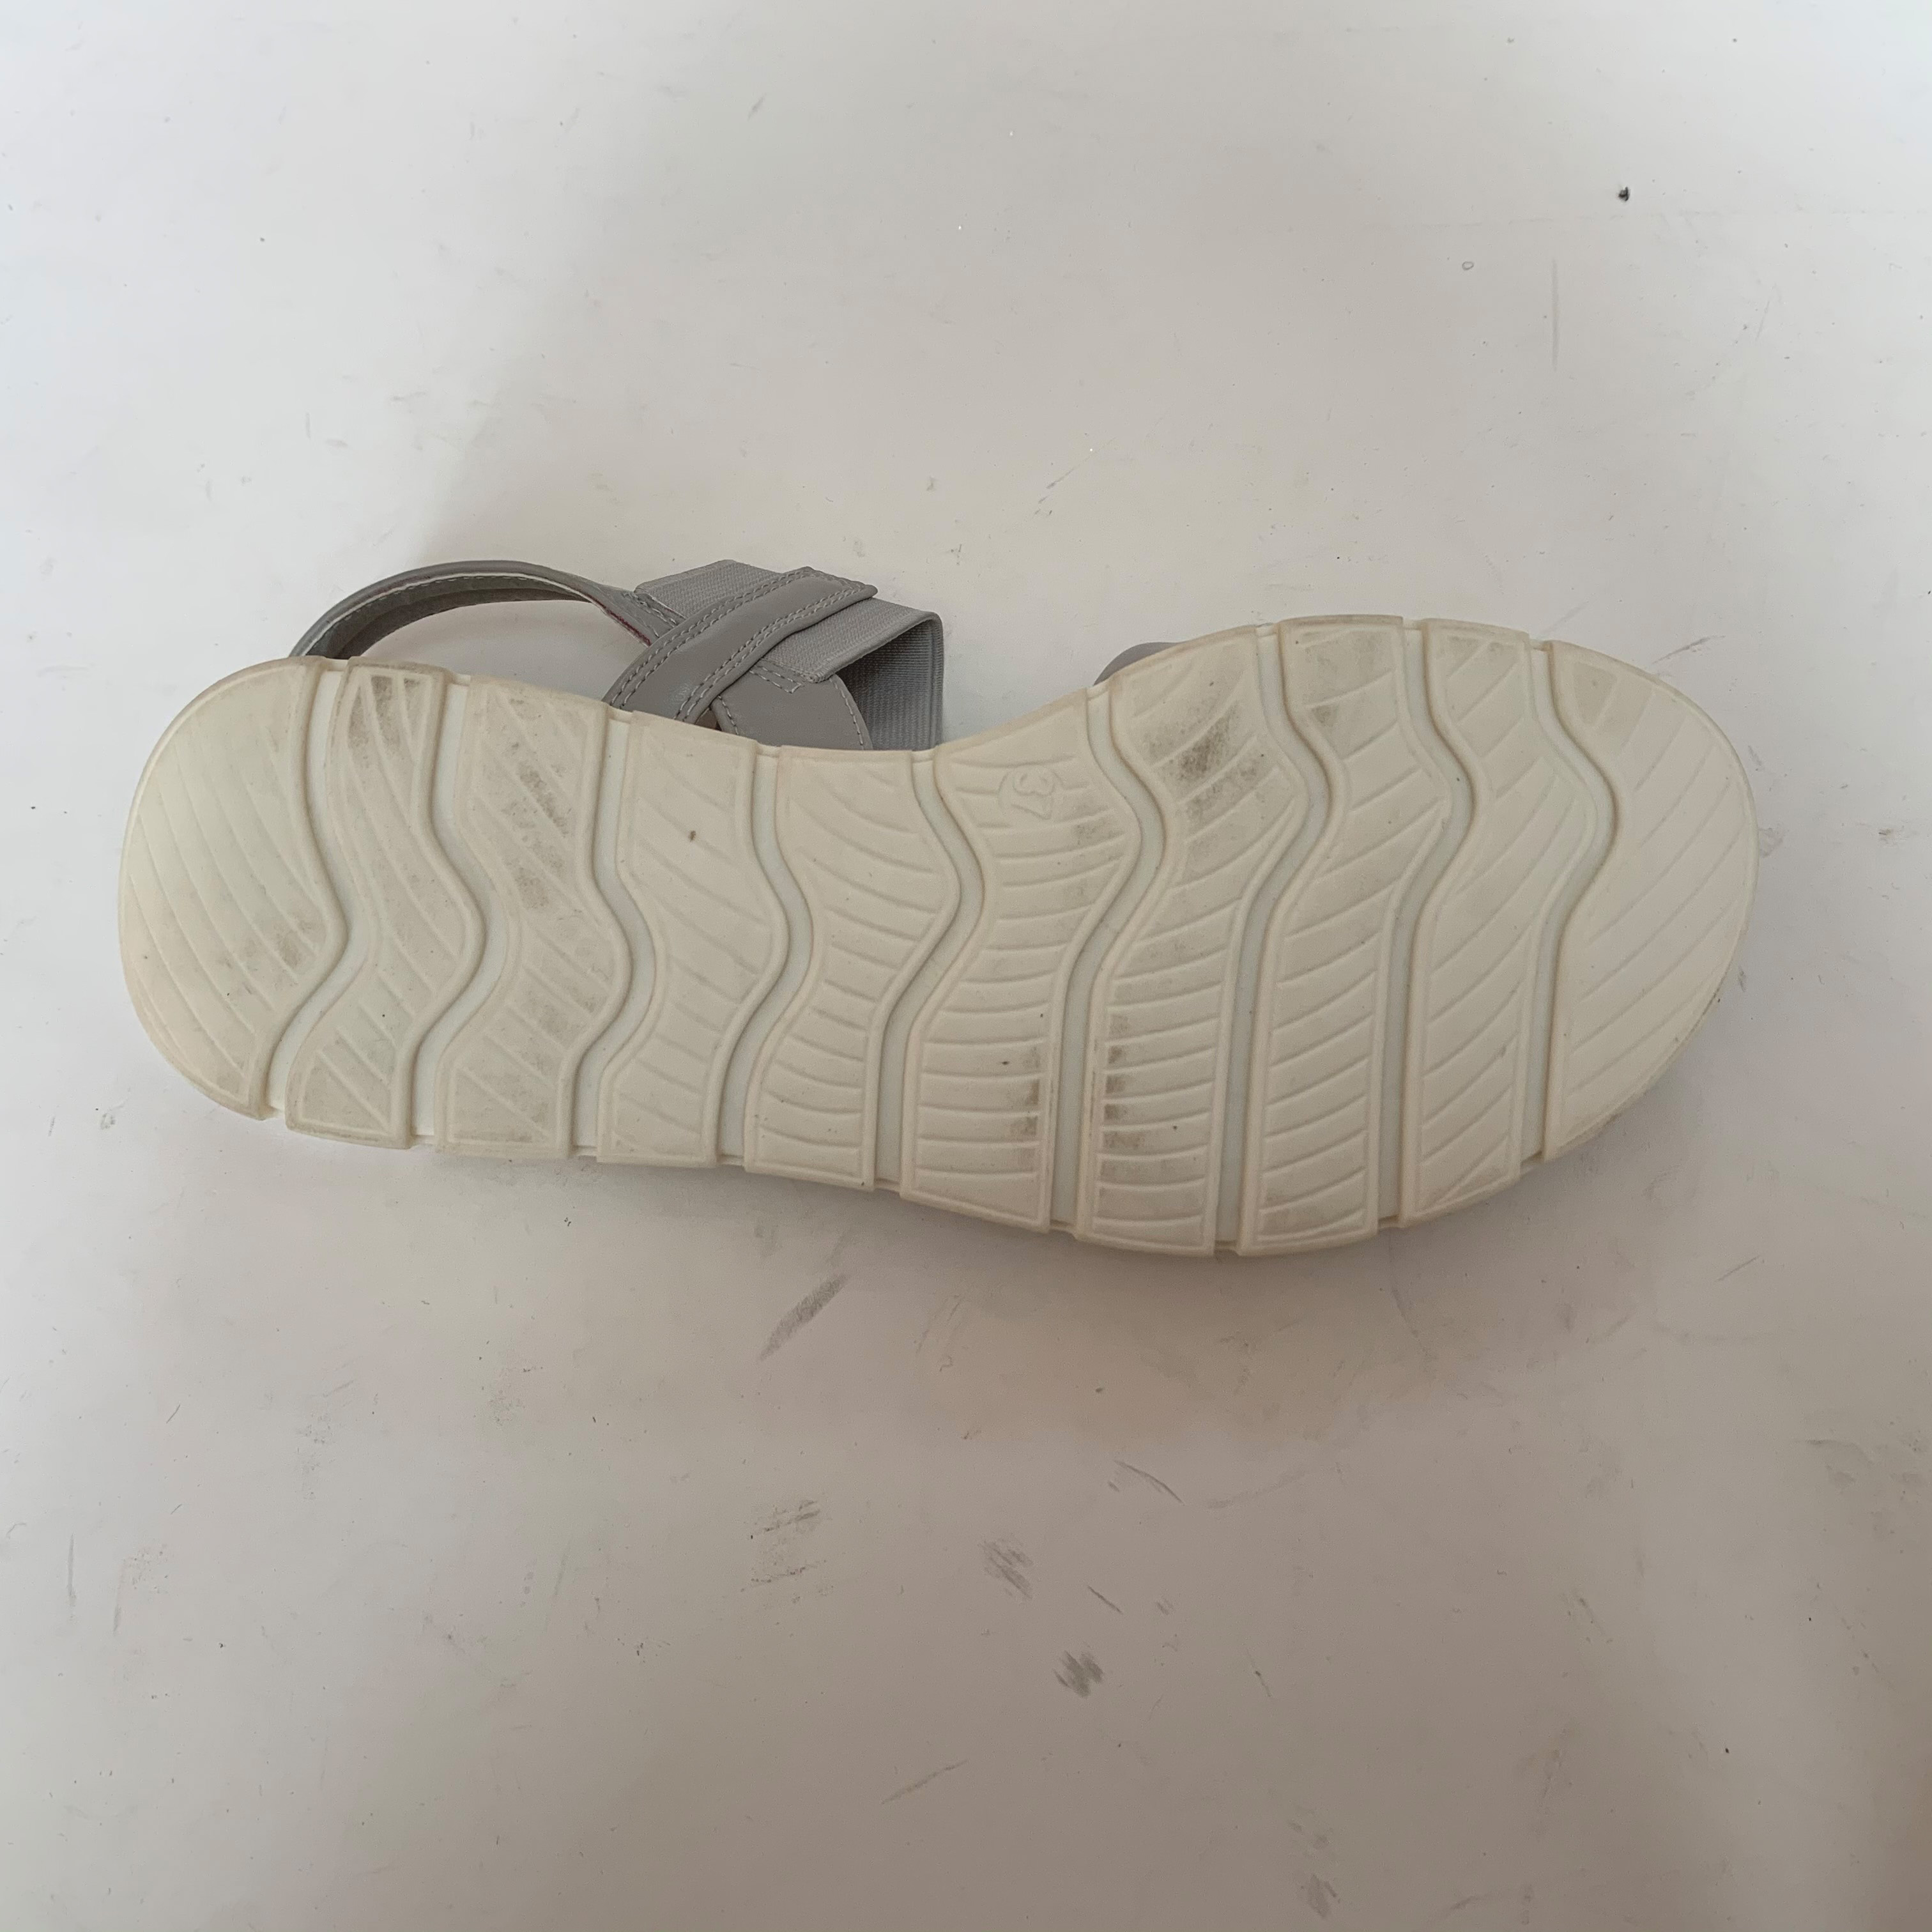 Women's Sandals With Punched Insole